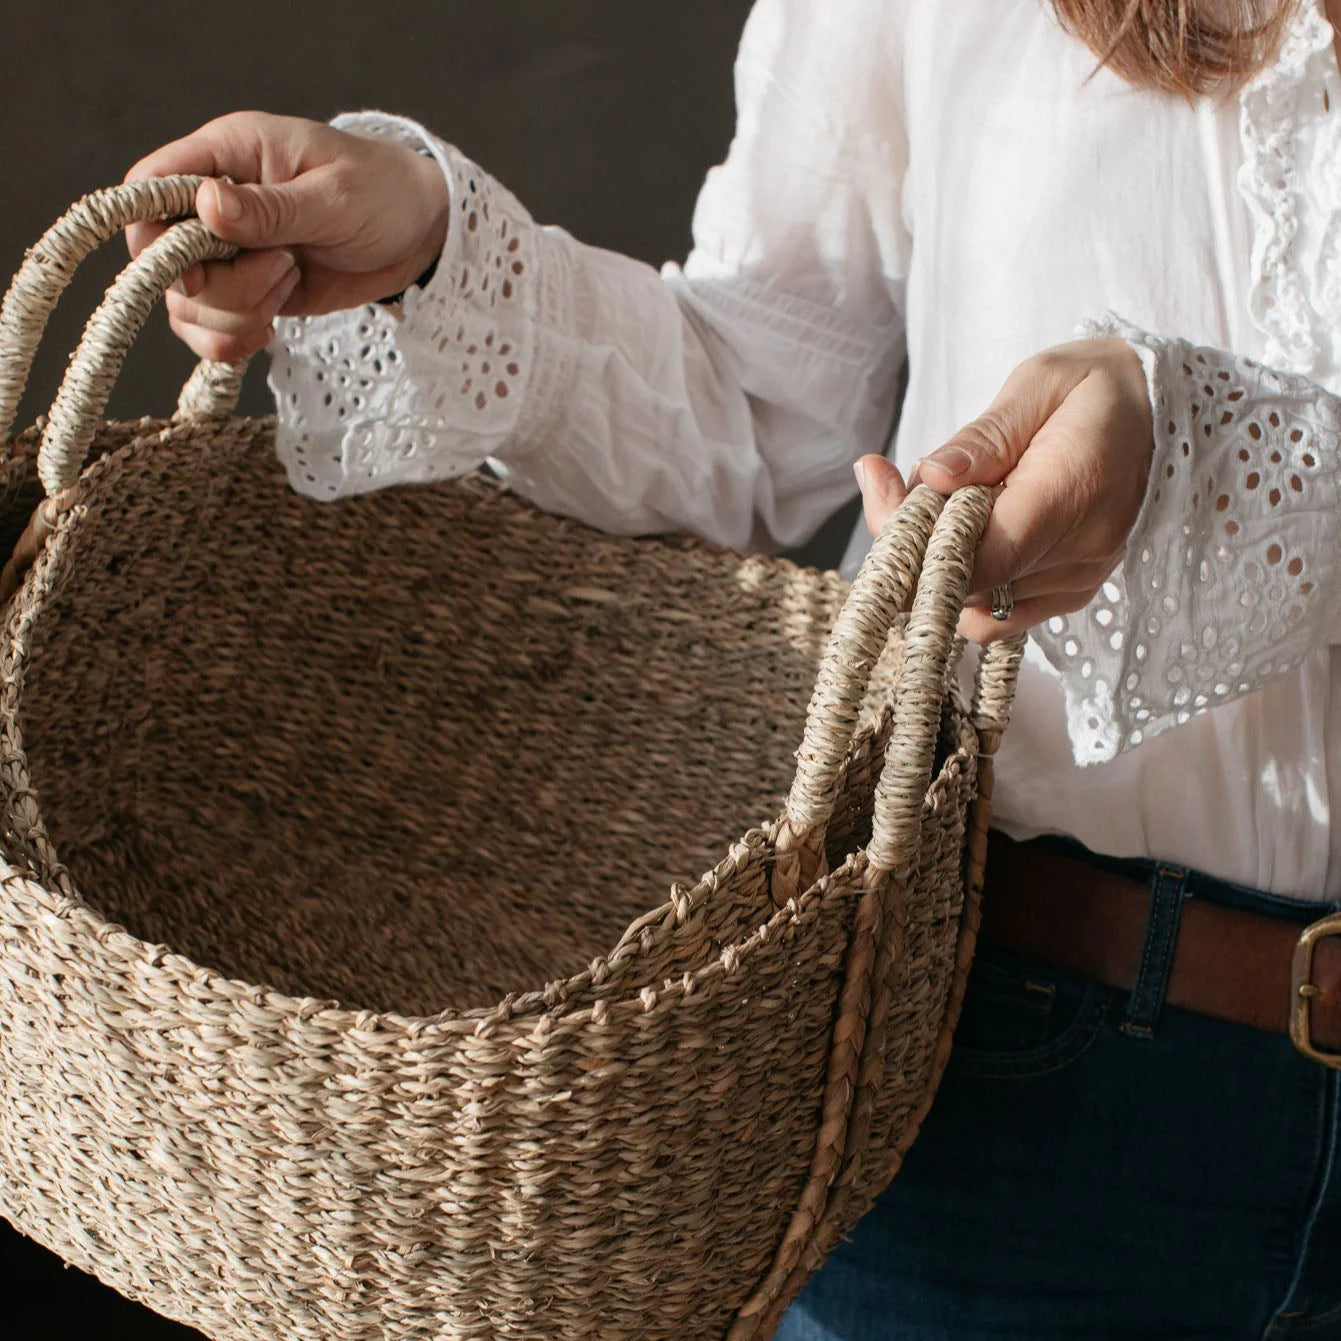 Woman in white linen shirt holding two seagrass baskets.